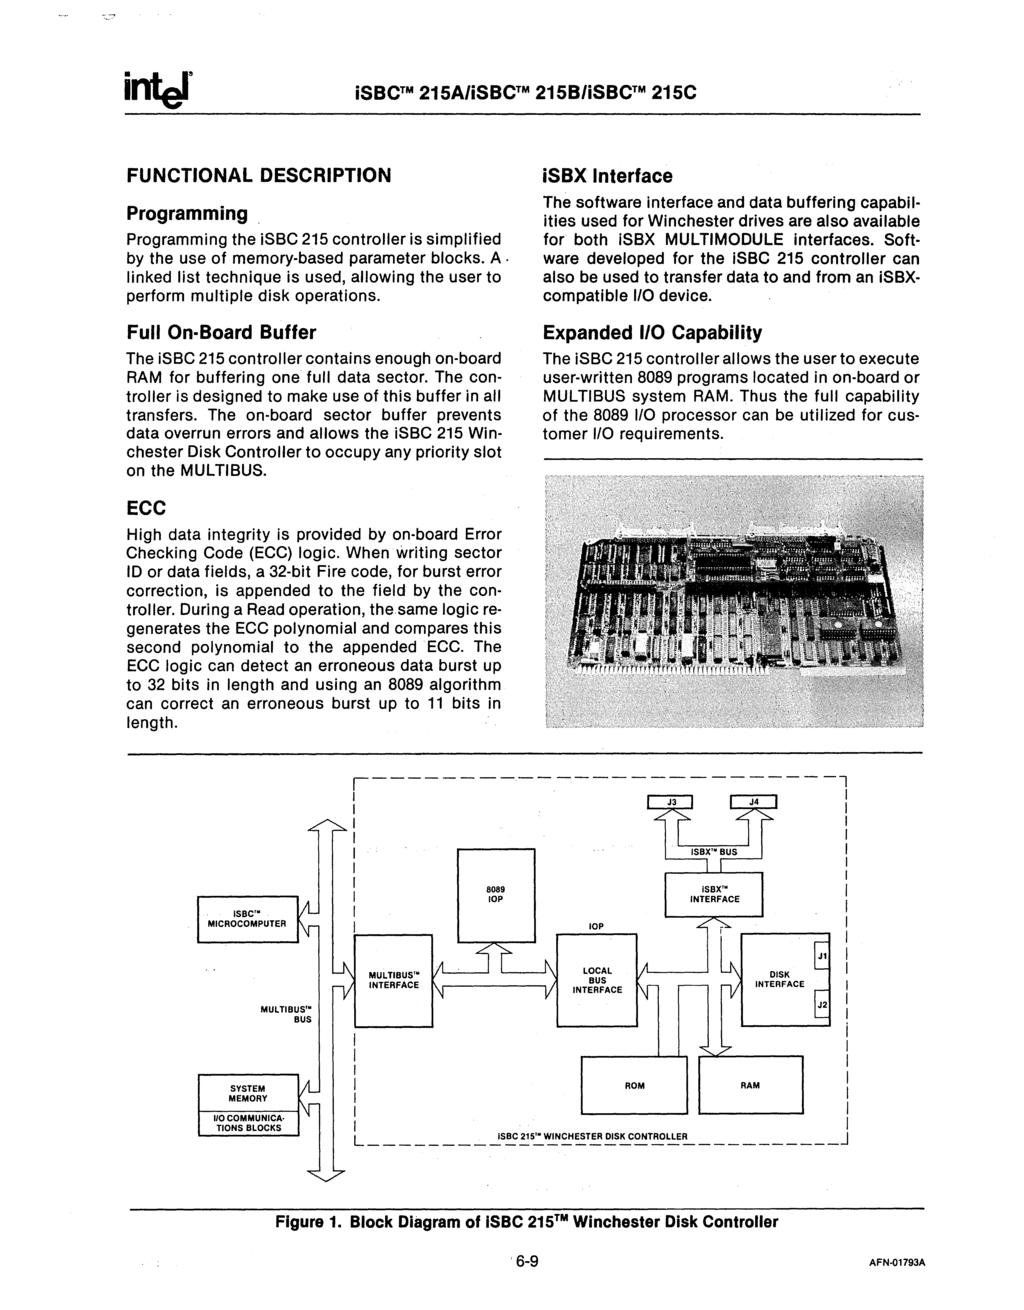 isbctm 215A/iSBCTM 215B/iSBCTM 215C FUNCTONAL DESCRPTON Programming Programming the isbc 215 controller is simplified by the use of memory-based parameter blocks. A.